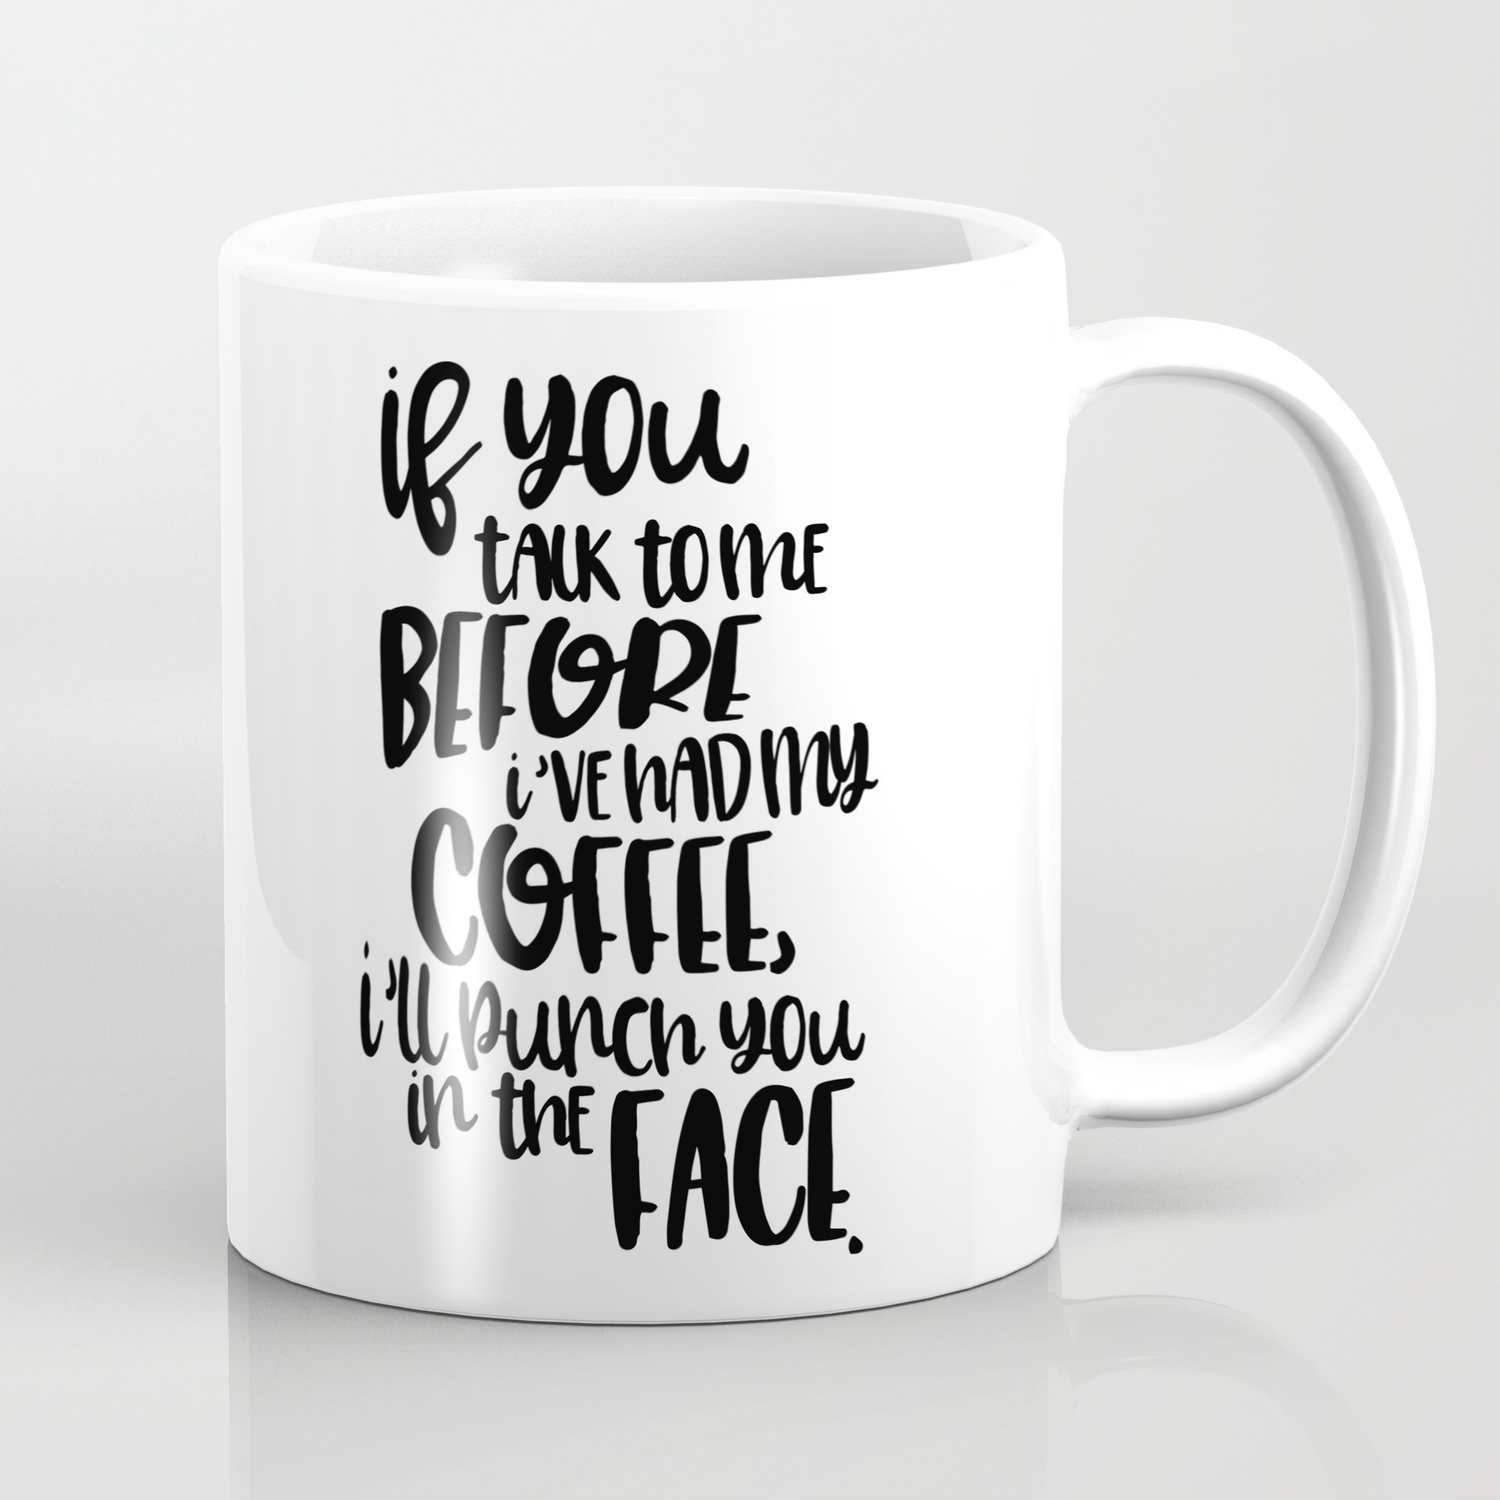 dont-talk-to-me-before-coffee-mugs.jpg